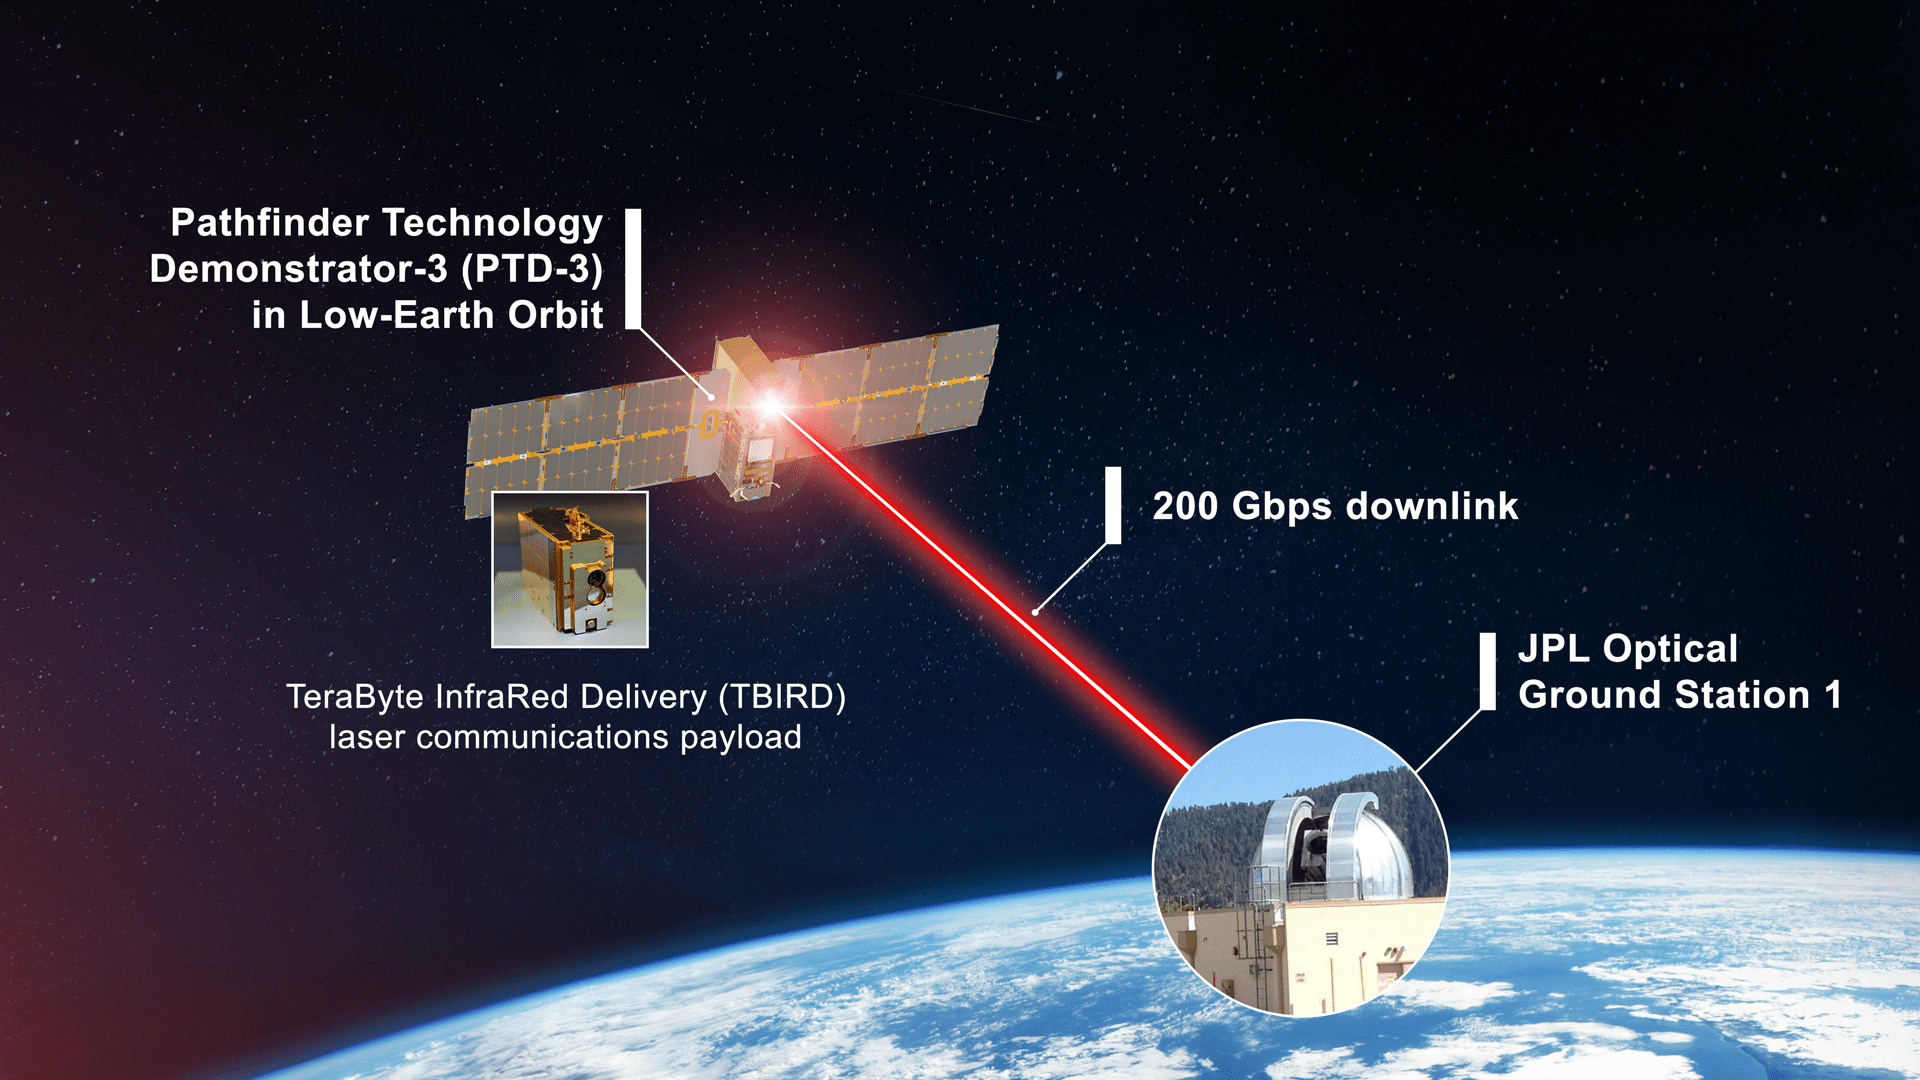 NASA Hopes Its Tissue Box-Sized Satellite Can Set a New Laser Speed Record